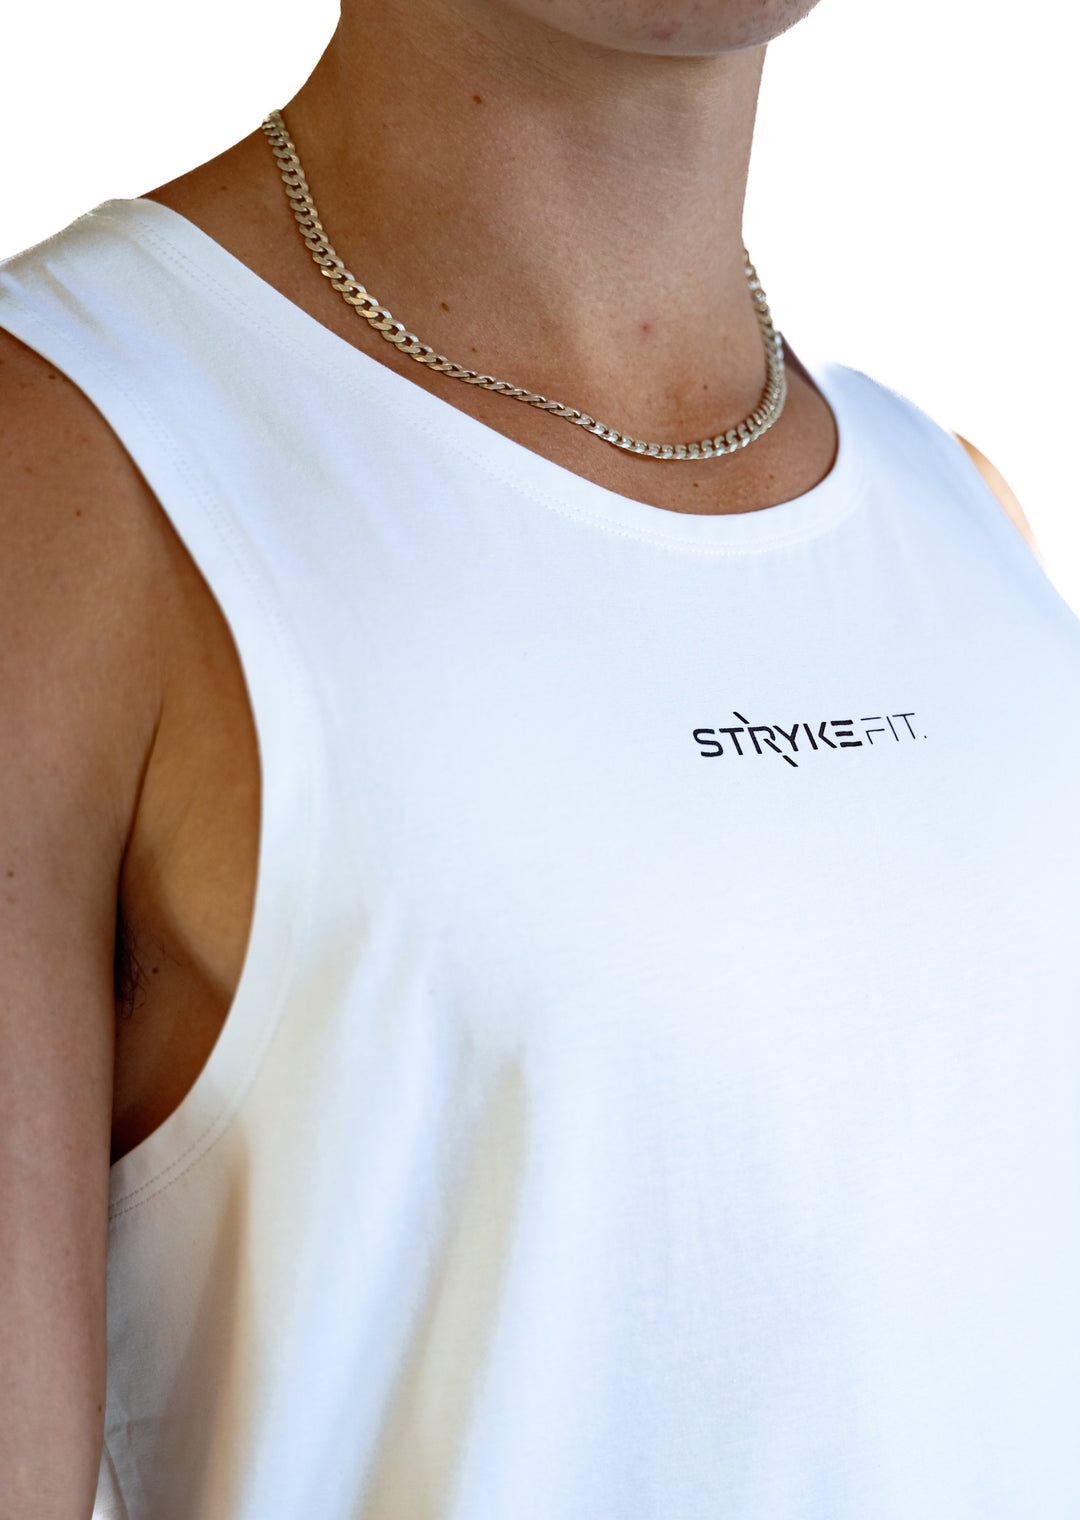 Unleash your running potential in our STRIDE SINGLET. If you're striving to achieve your personal goals, this is the singlet for you. Designed with wider shoulders for maximum comfort, it's here to support you every step of the way on your running journey.